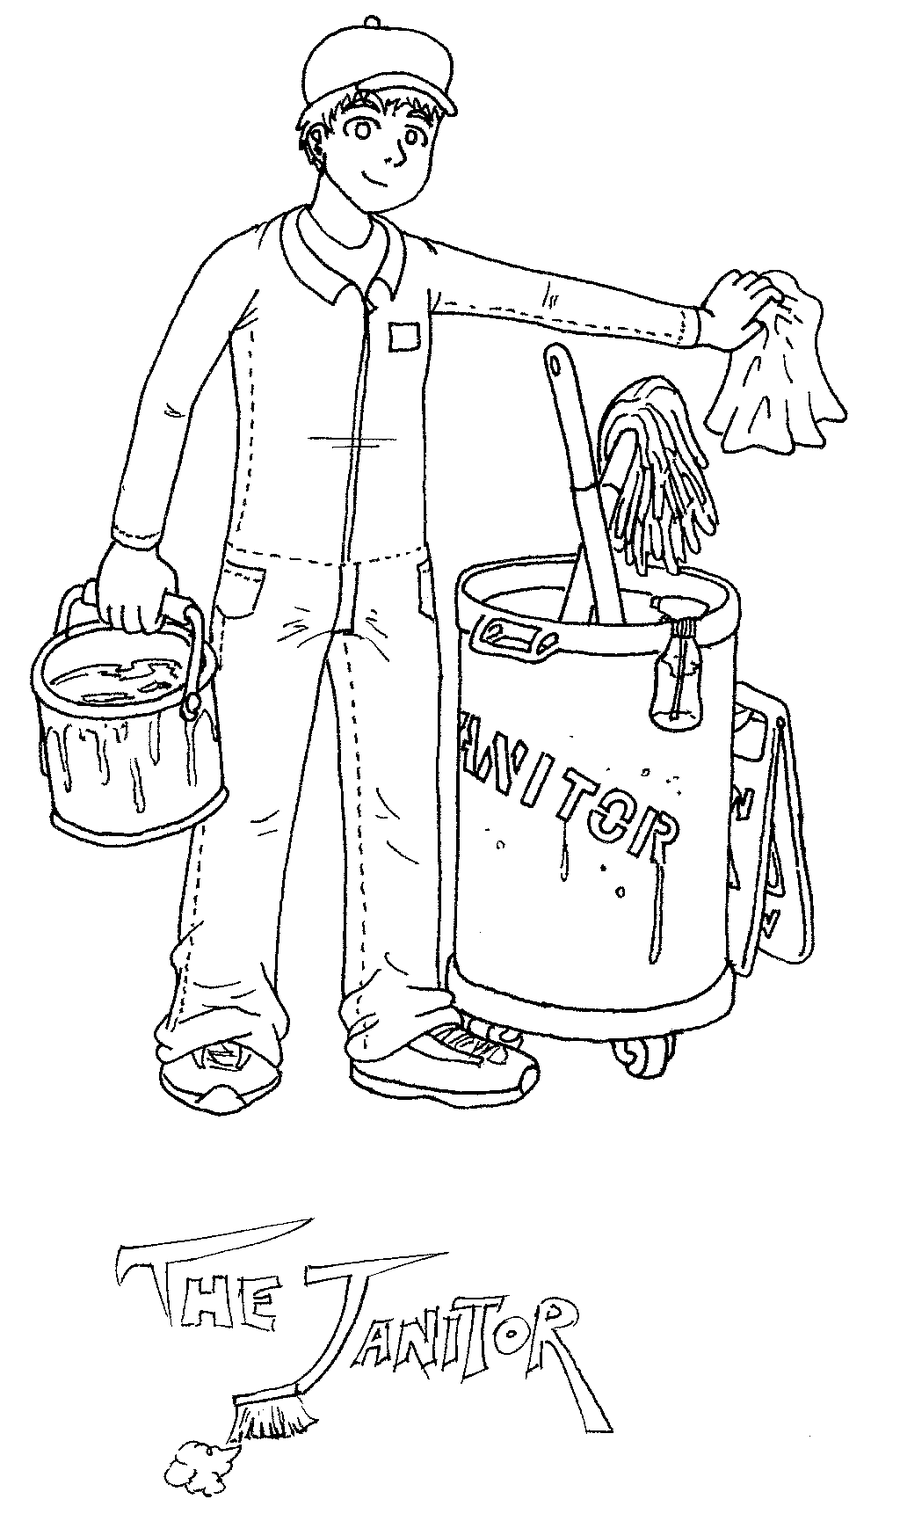 Janitor Icon